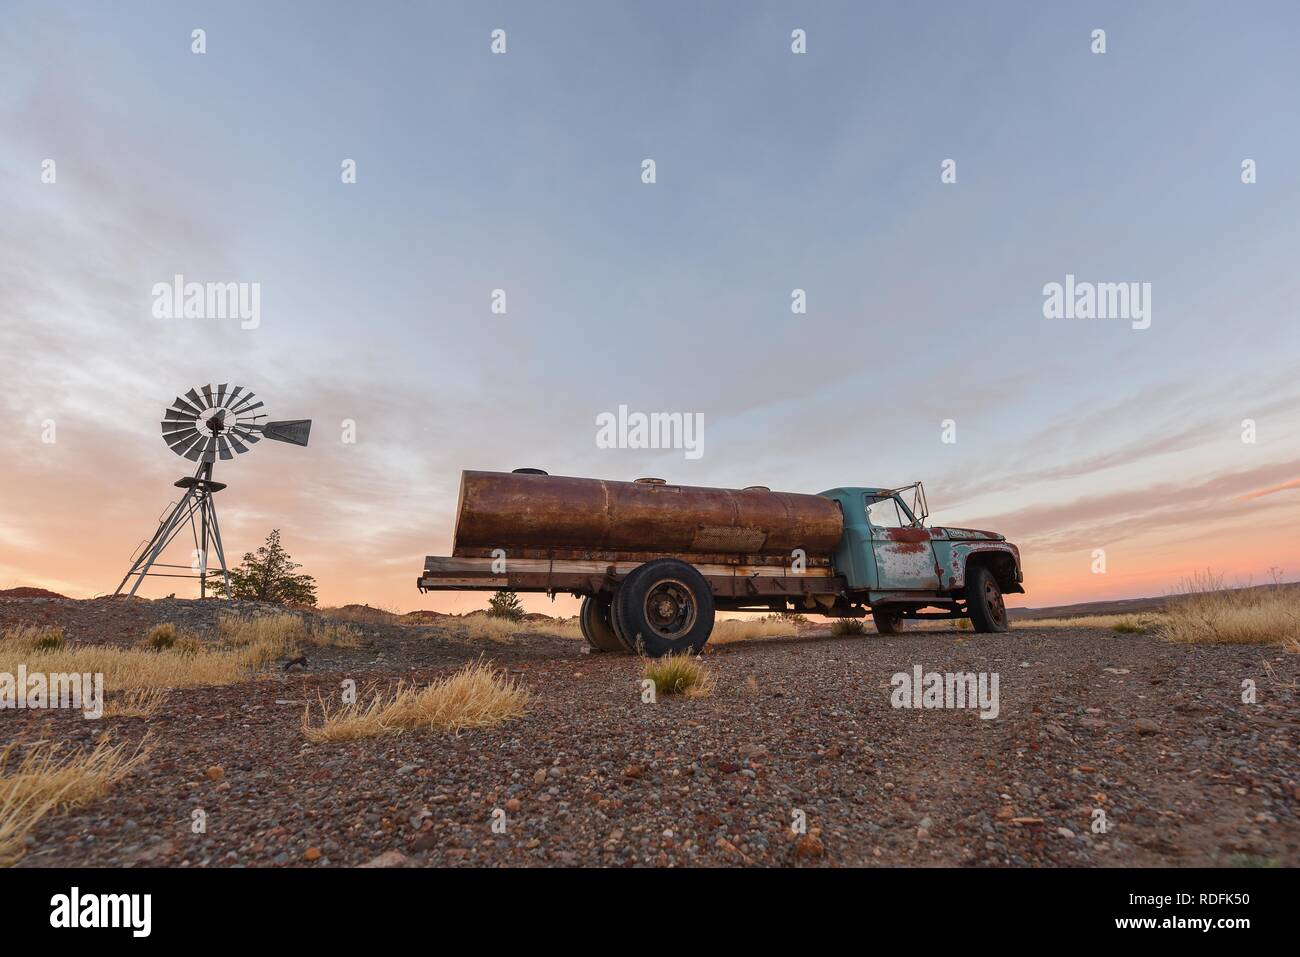 Pampa with old trucks on a farm in Bosques Petrificados de Jaramillo National Park, Patagonia, Argentina Stock Photo